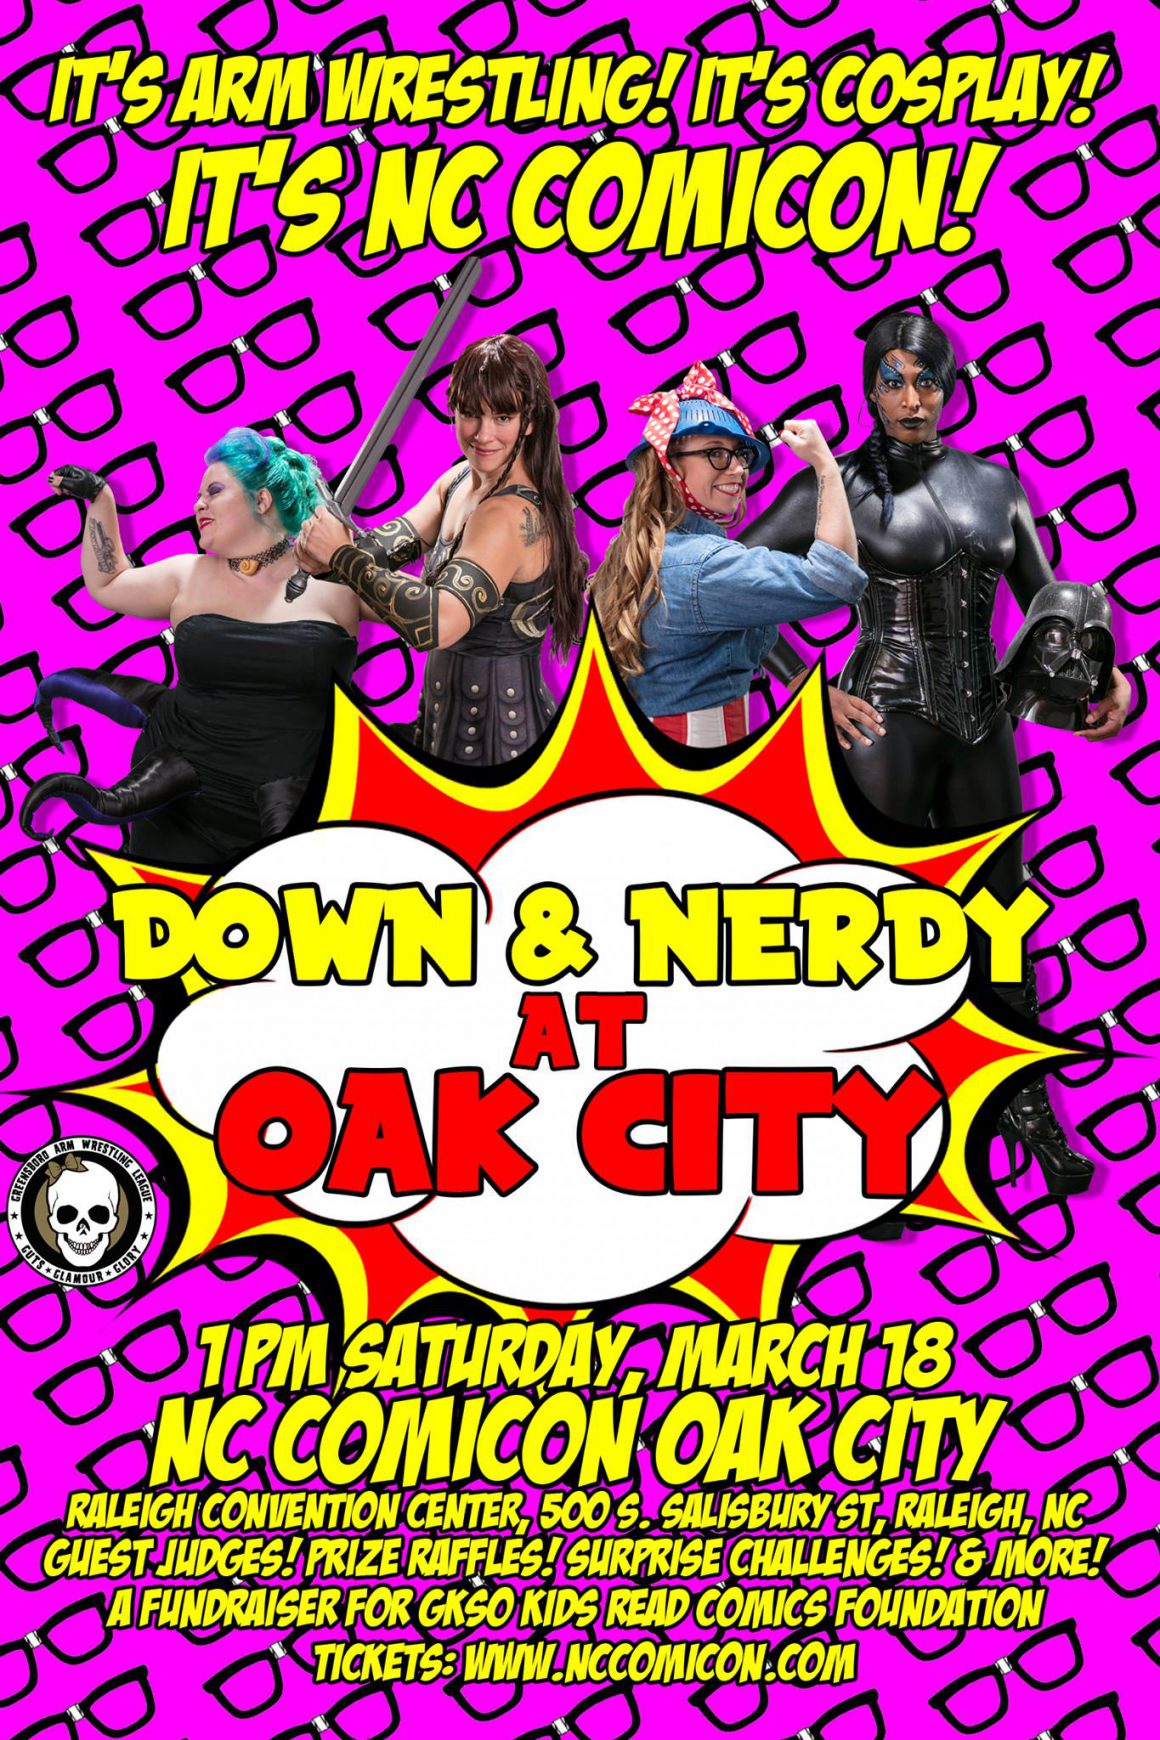 Meet your favorite GRAWL wrestlers at Oak City ComiCon